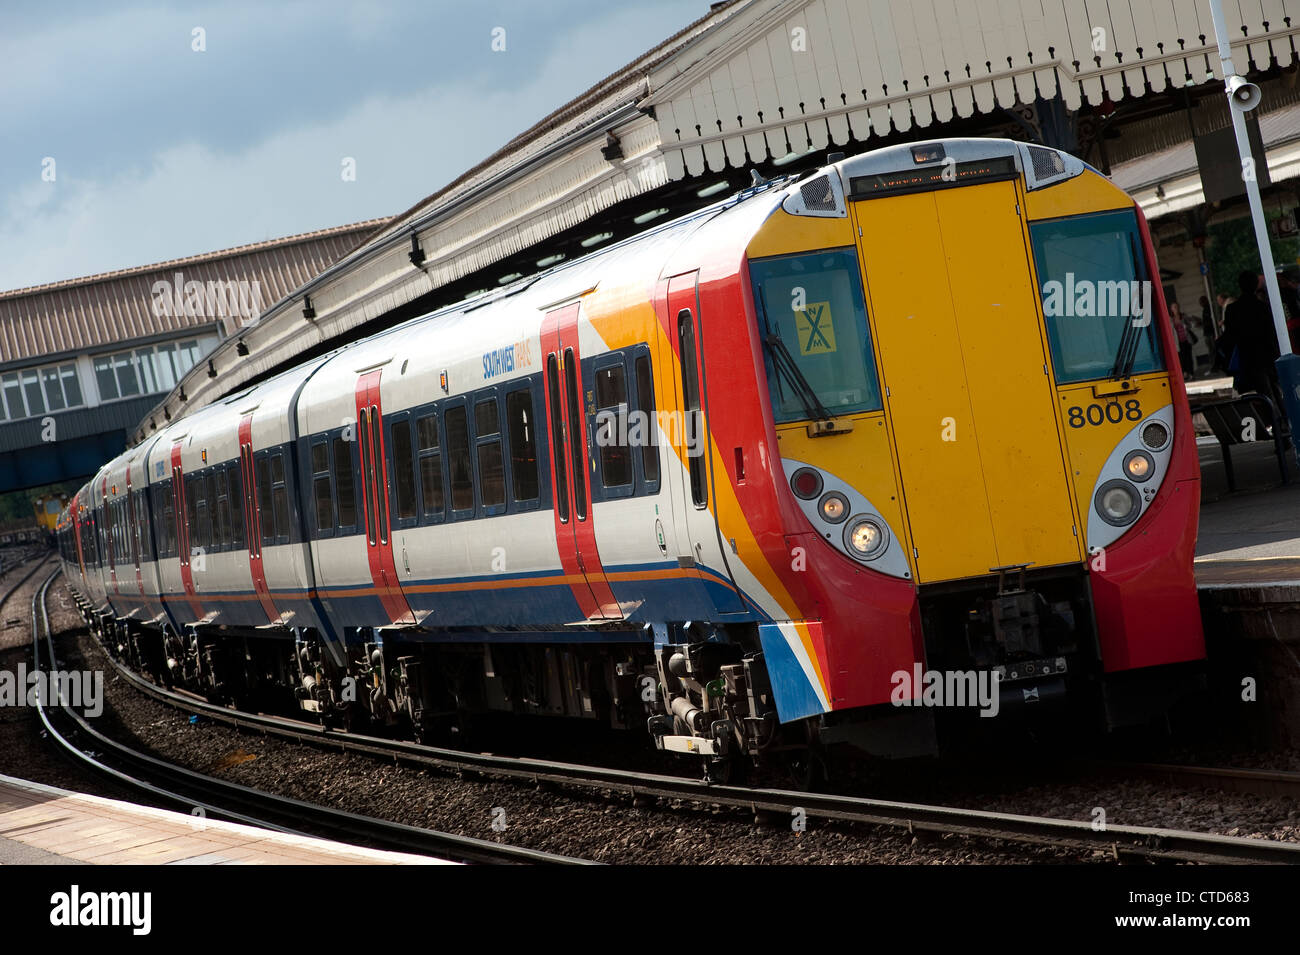 Class 458 passenger train in South West Trains livery at Clapham Junction station, England. Stock Photo